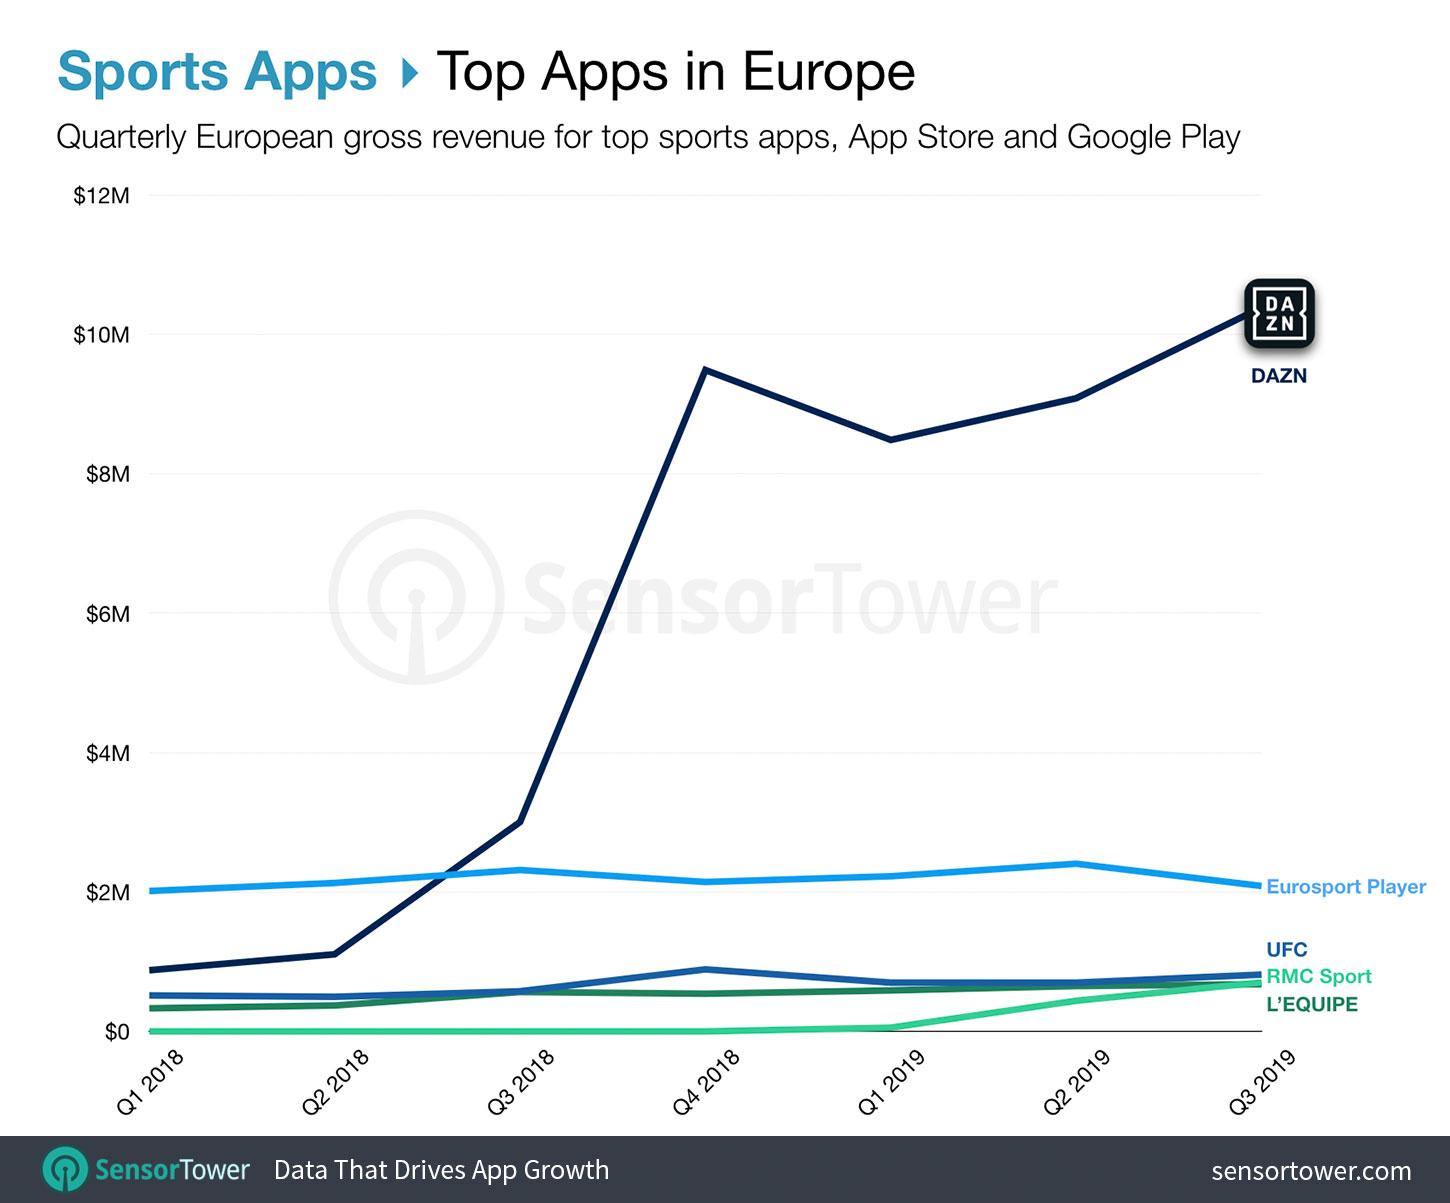 Top Sports Apps in Europe for Q3 2019